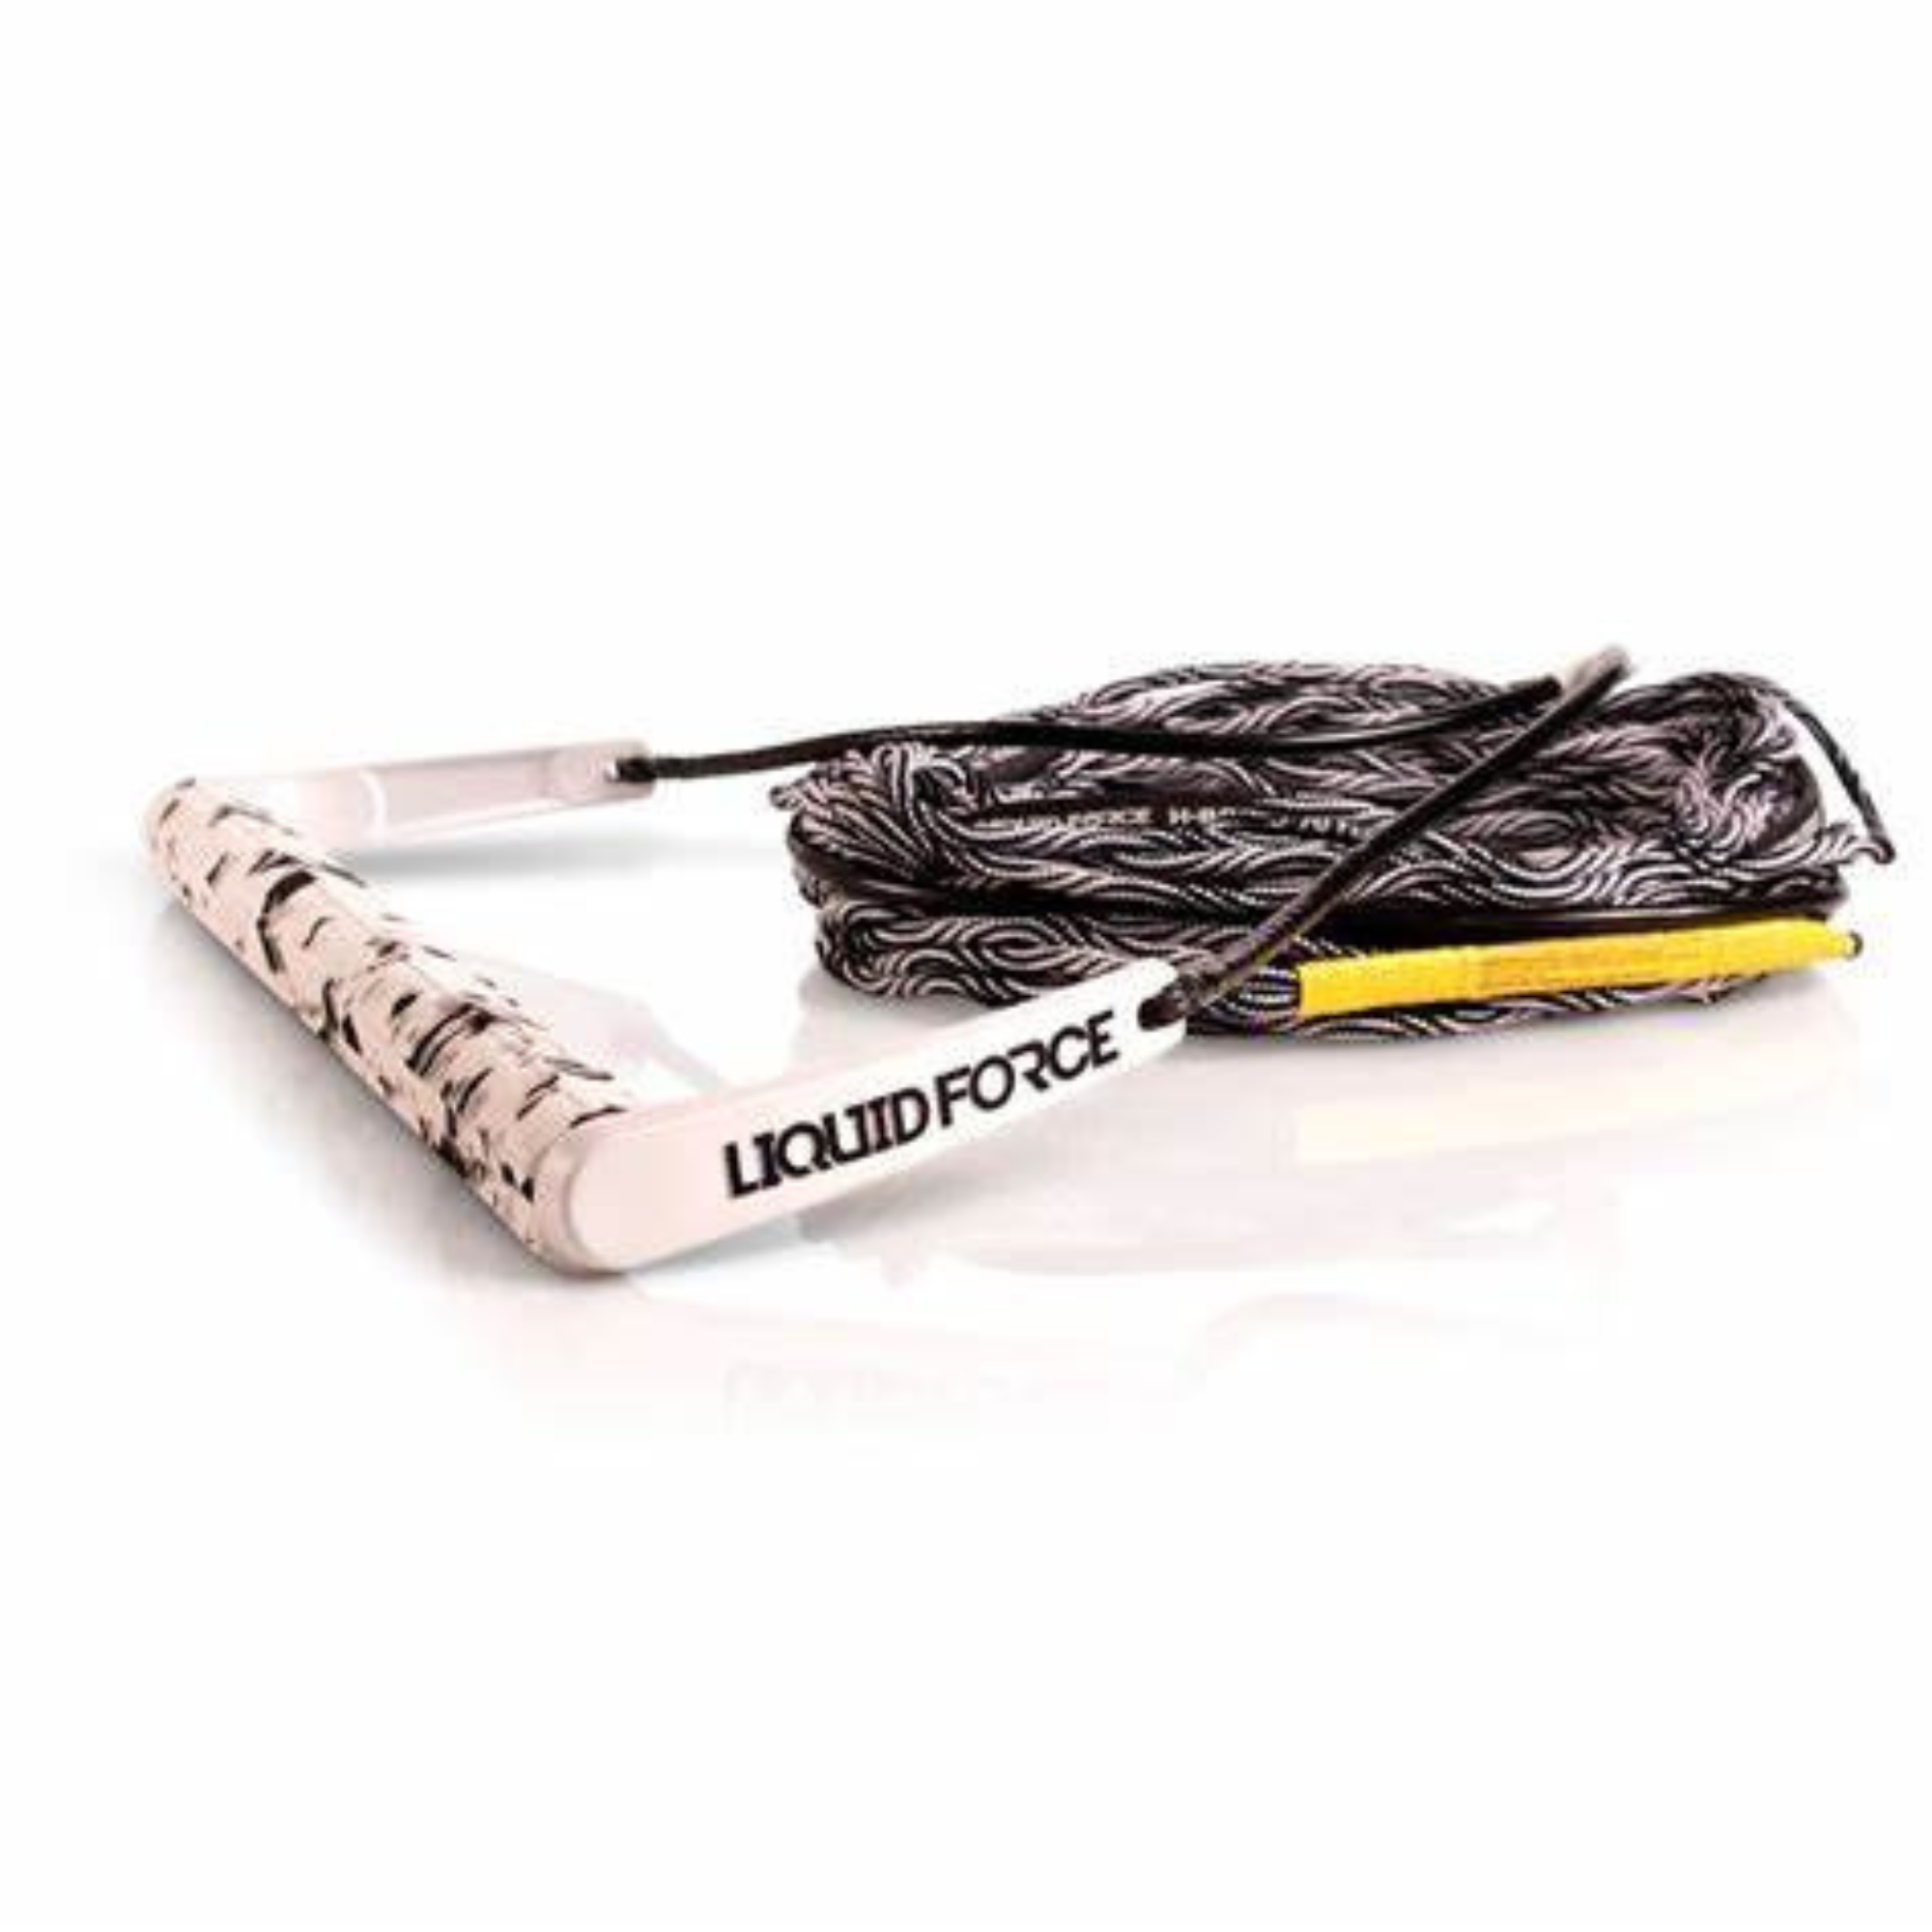 Liquid Force Team Handle with H-Braid 70' Combo - White